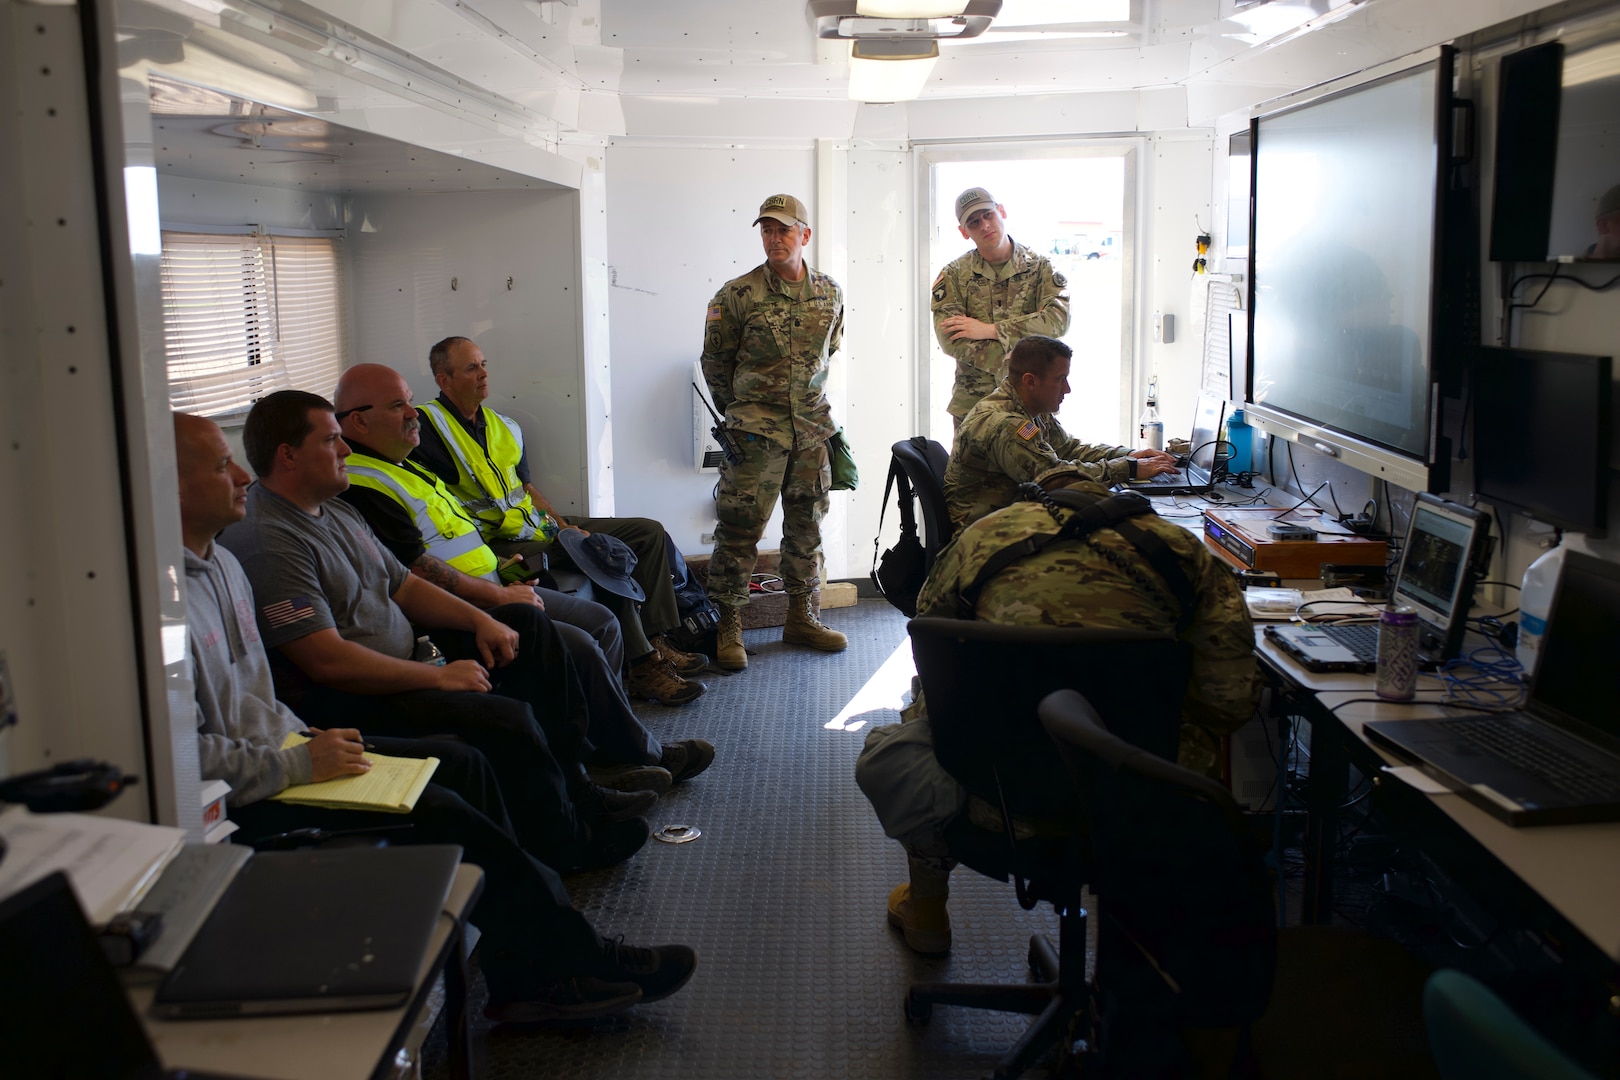 Members of the 63rd Civil Support Team, Oklahoma National Guard, partner with first responders as part of a 72-hour field exercise in Altus, Oklahoma, May 4-6, 2021.

This multi-day training event is one of several exercise scheduled around the state this year designed to test Guard members, emergency management personnel and first responders ability to quickly work to together during natural and man-made disasters. (Oklahoma National Guard photo by Lt. Col. Geoff Legler)